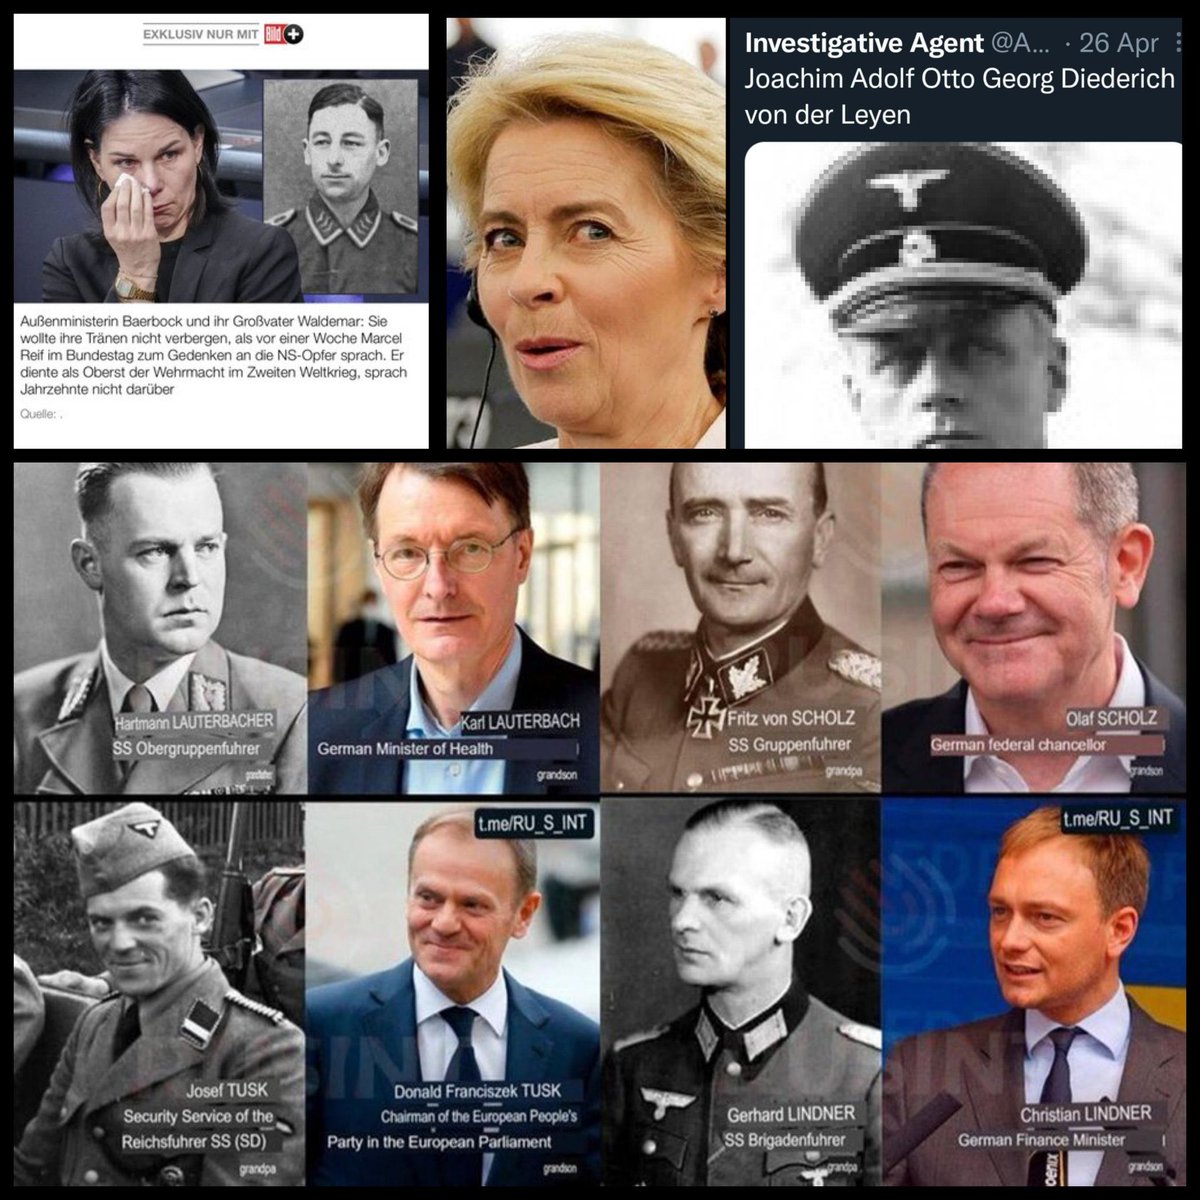 The Nuremberg trial was the biggest charade ever.

The allies convicted just 140 people, mostly people with no real power.

Top Nazis were all recruited by the CIA and NATO.

Now, top German officials have family link to Hitler’s government.

Von der Leyen, Scholz, Baerbock… the